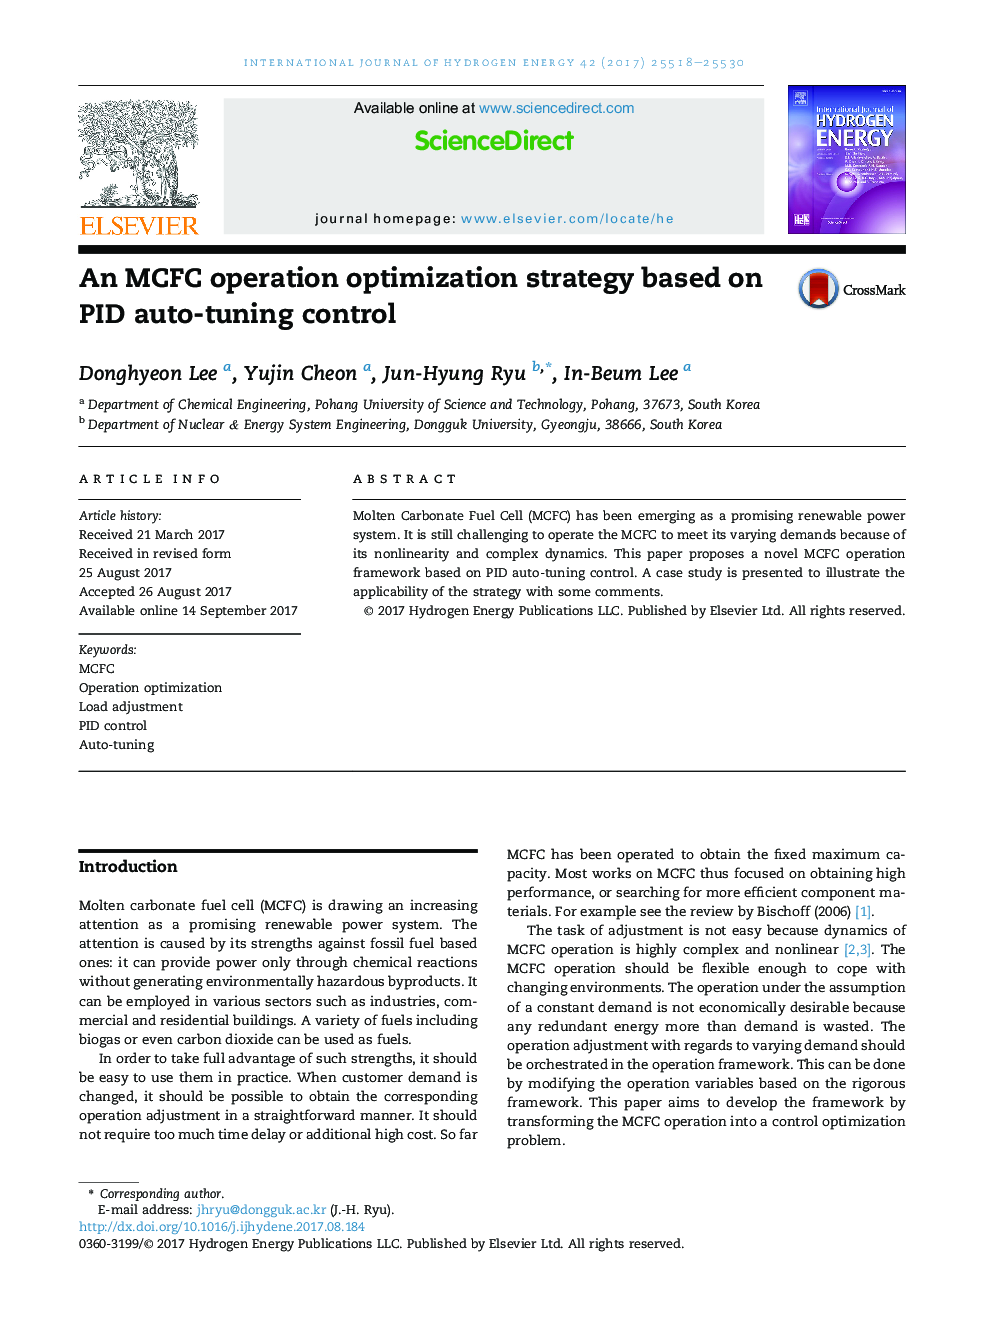 An MCFC operation optimization strategy based on PID auto-tuning control